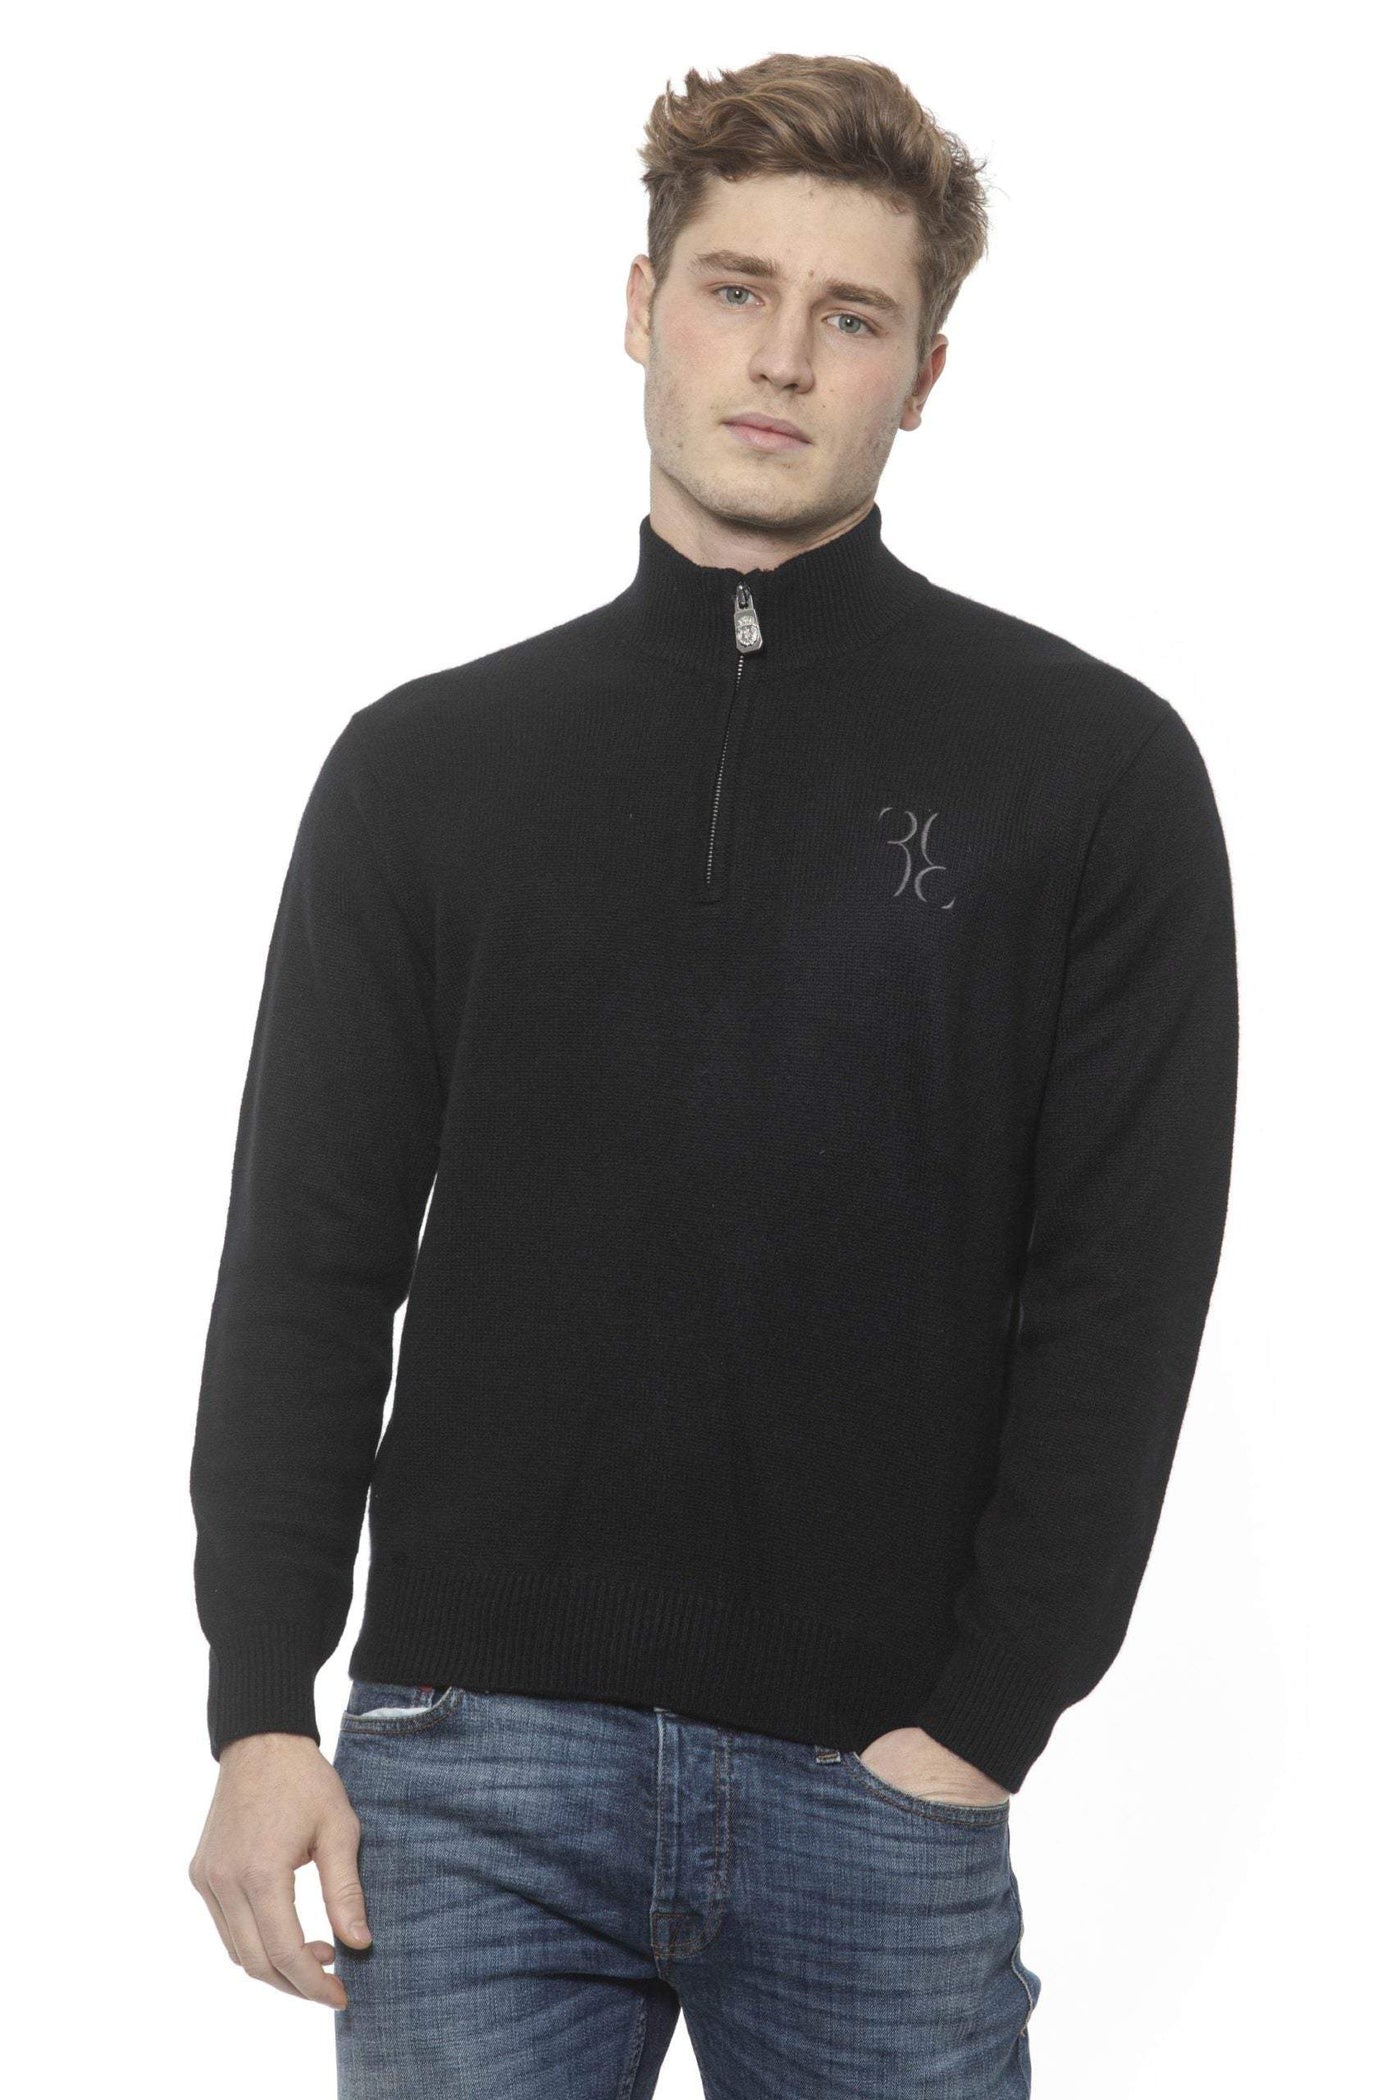 Billionaire Italian Couture emboidered zipped  Sweater #men, Billionaire Italian Couture, Black, feed-agegroup-adult, feed-color-Black, feed-gender-male, L, Sweaters - Men - Clothing, XL, XXL at SEYMAYKA